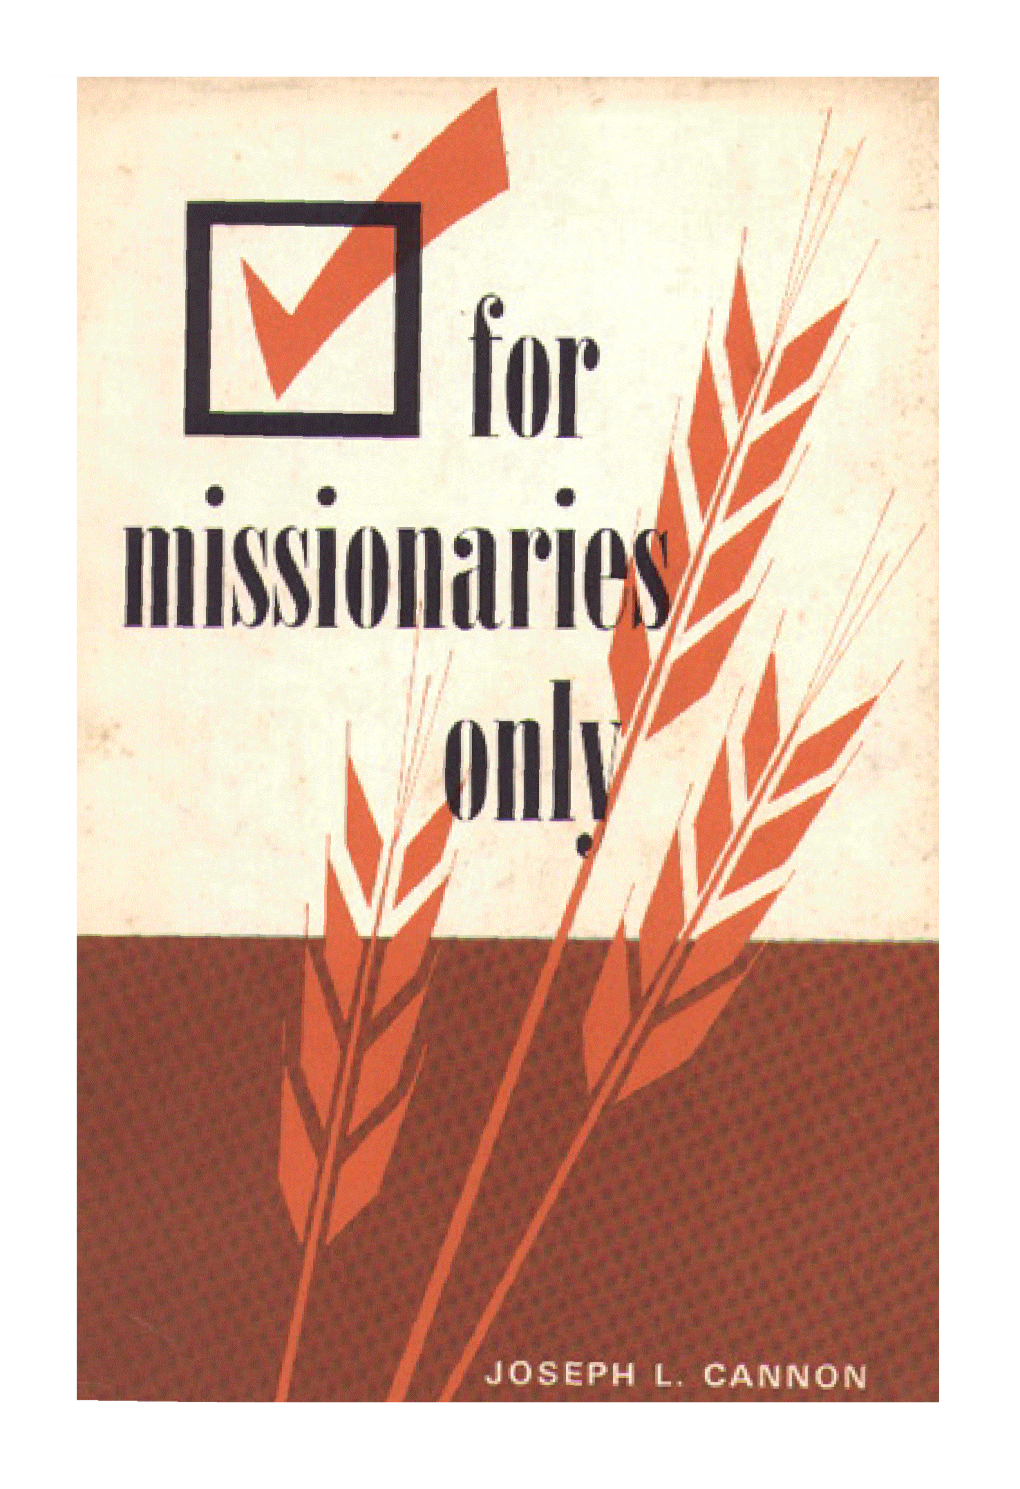 FOR MISSIONARIES ONLY by Joseph L